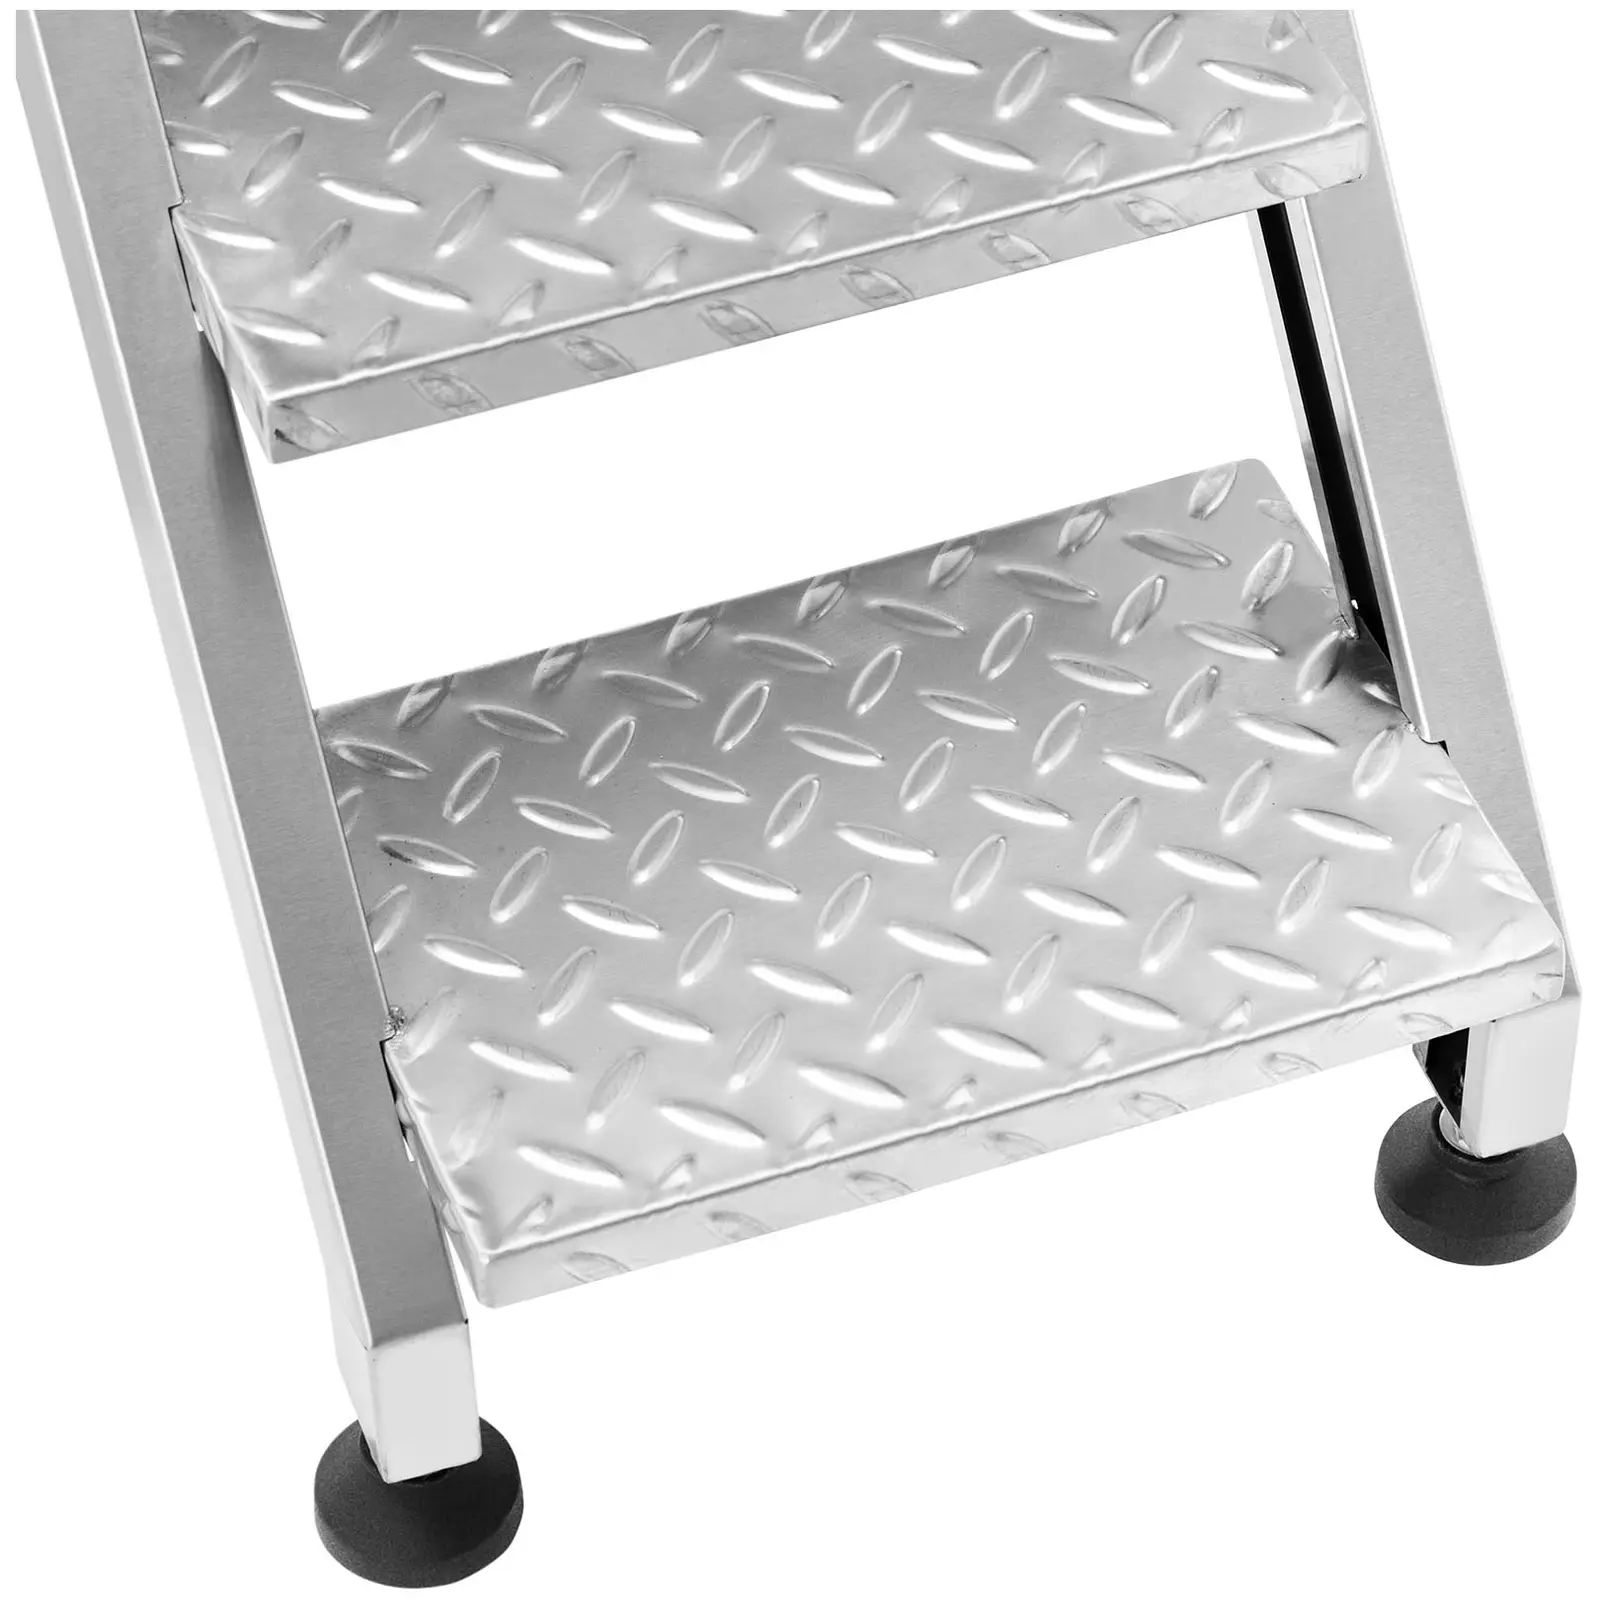 Dog bath - stainless steel - up to 60 kg - with steps